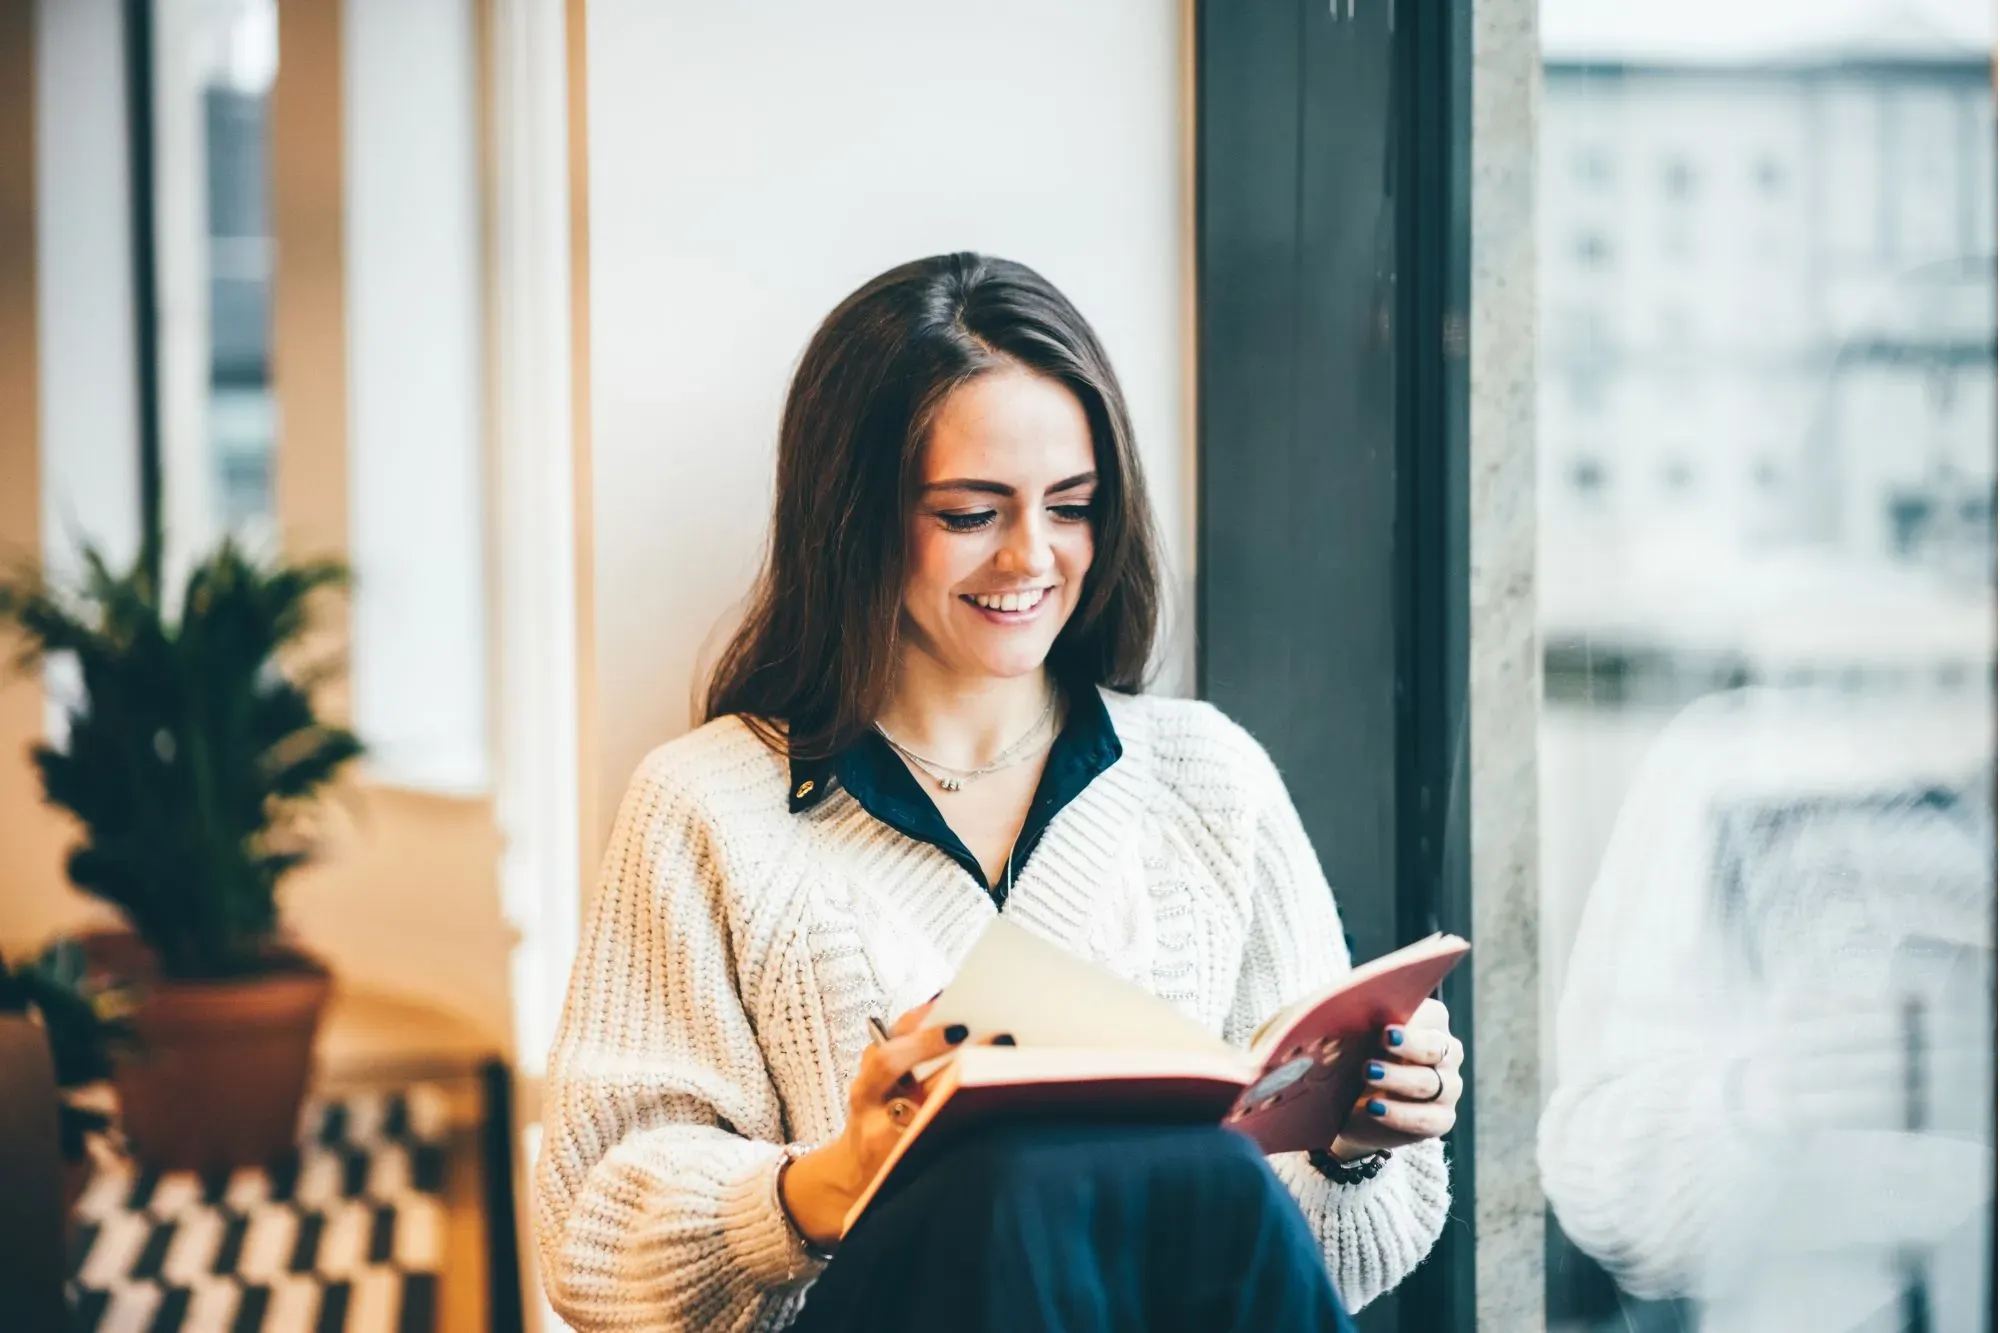 A woman happily reading a book at work